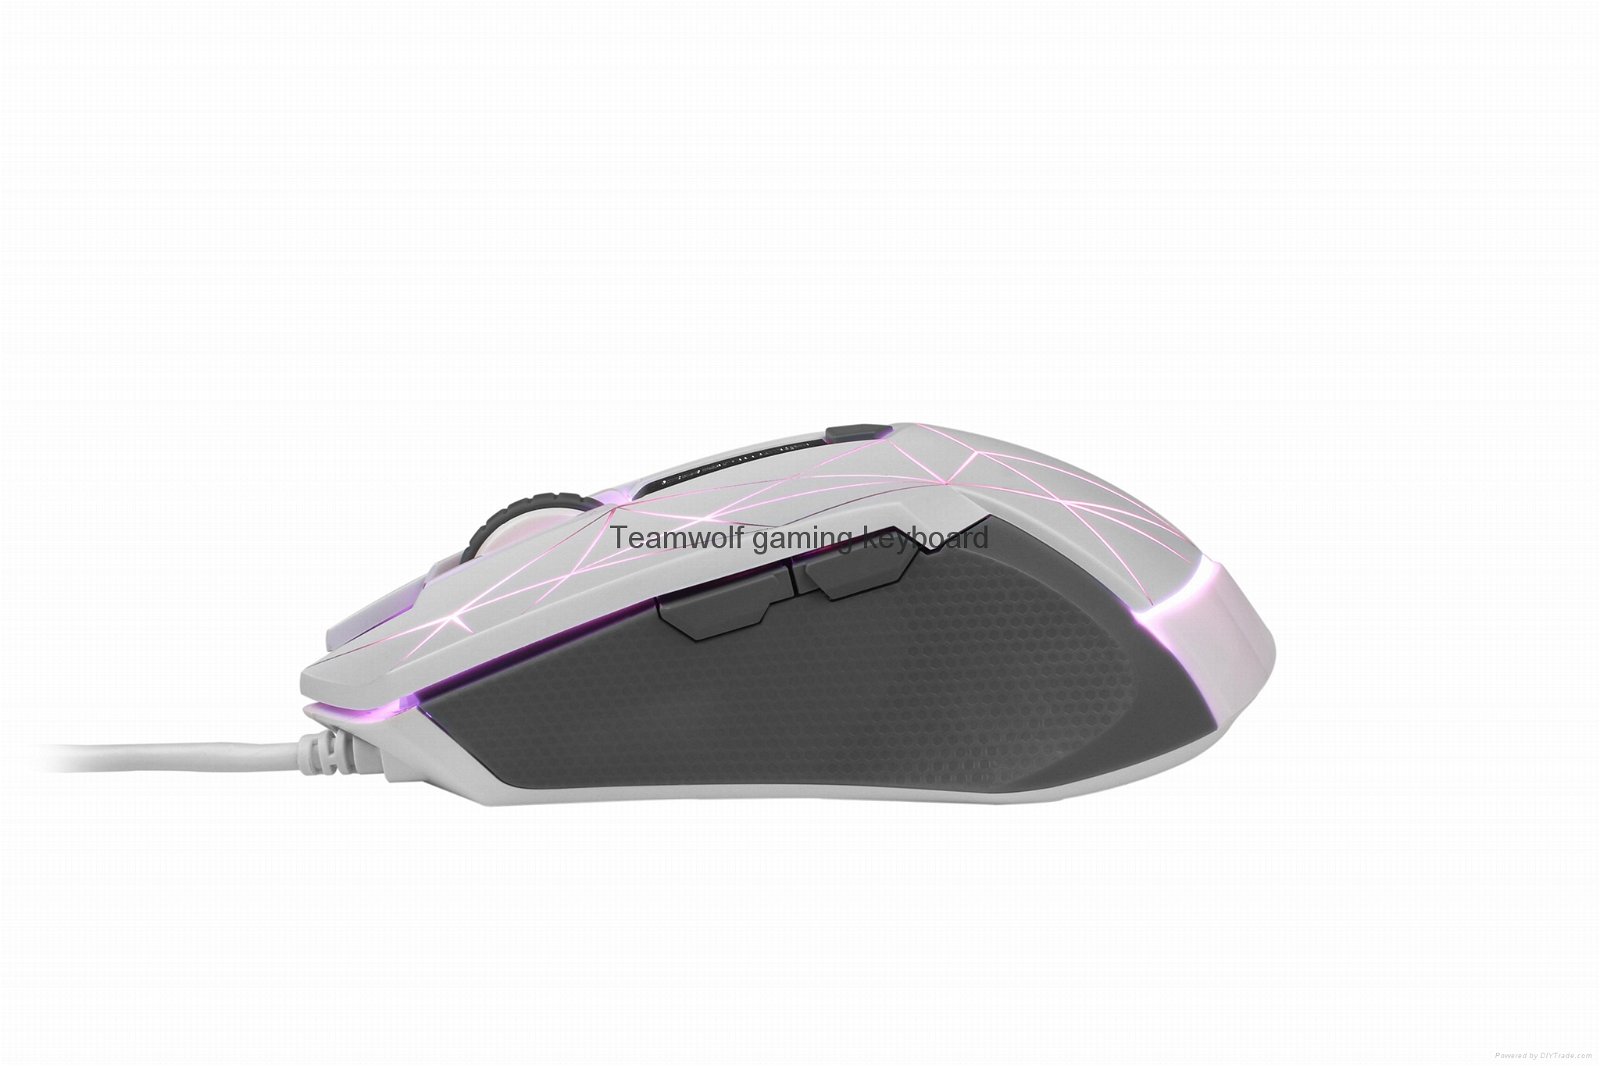 Arbiter-TEAMWOLF wired gaming mouse 966 3